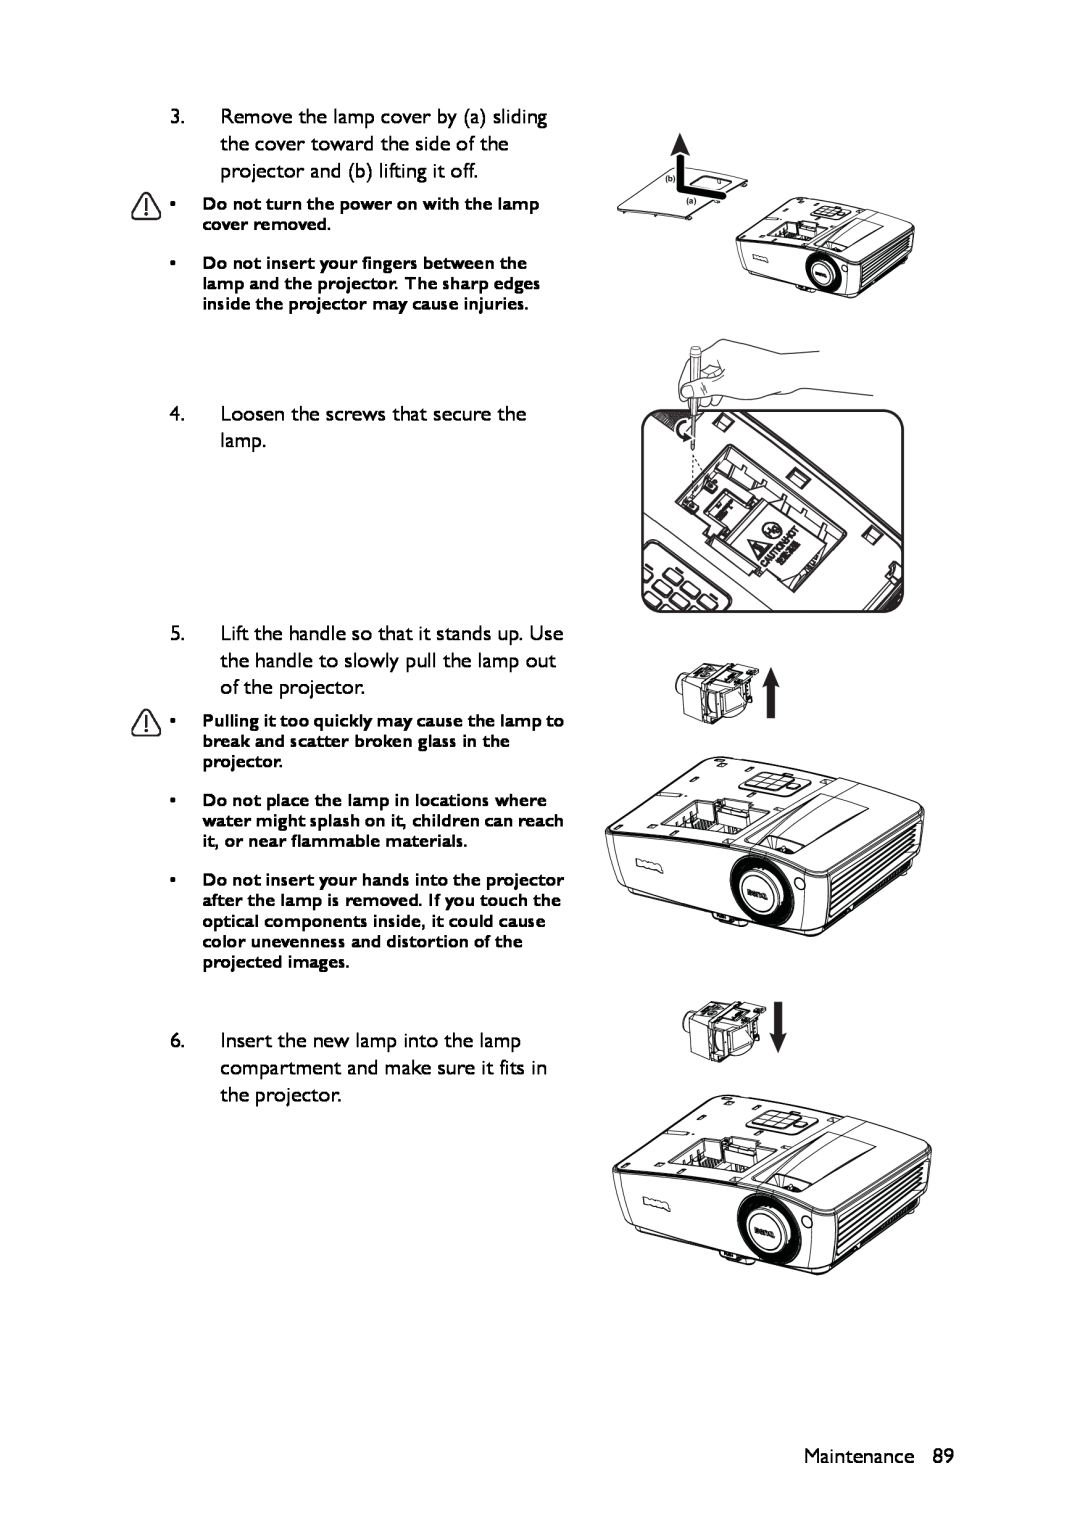 BenQ MX661 user manual Do not turn the power on with the lamp cover removed 